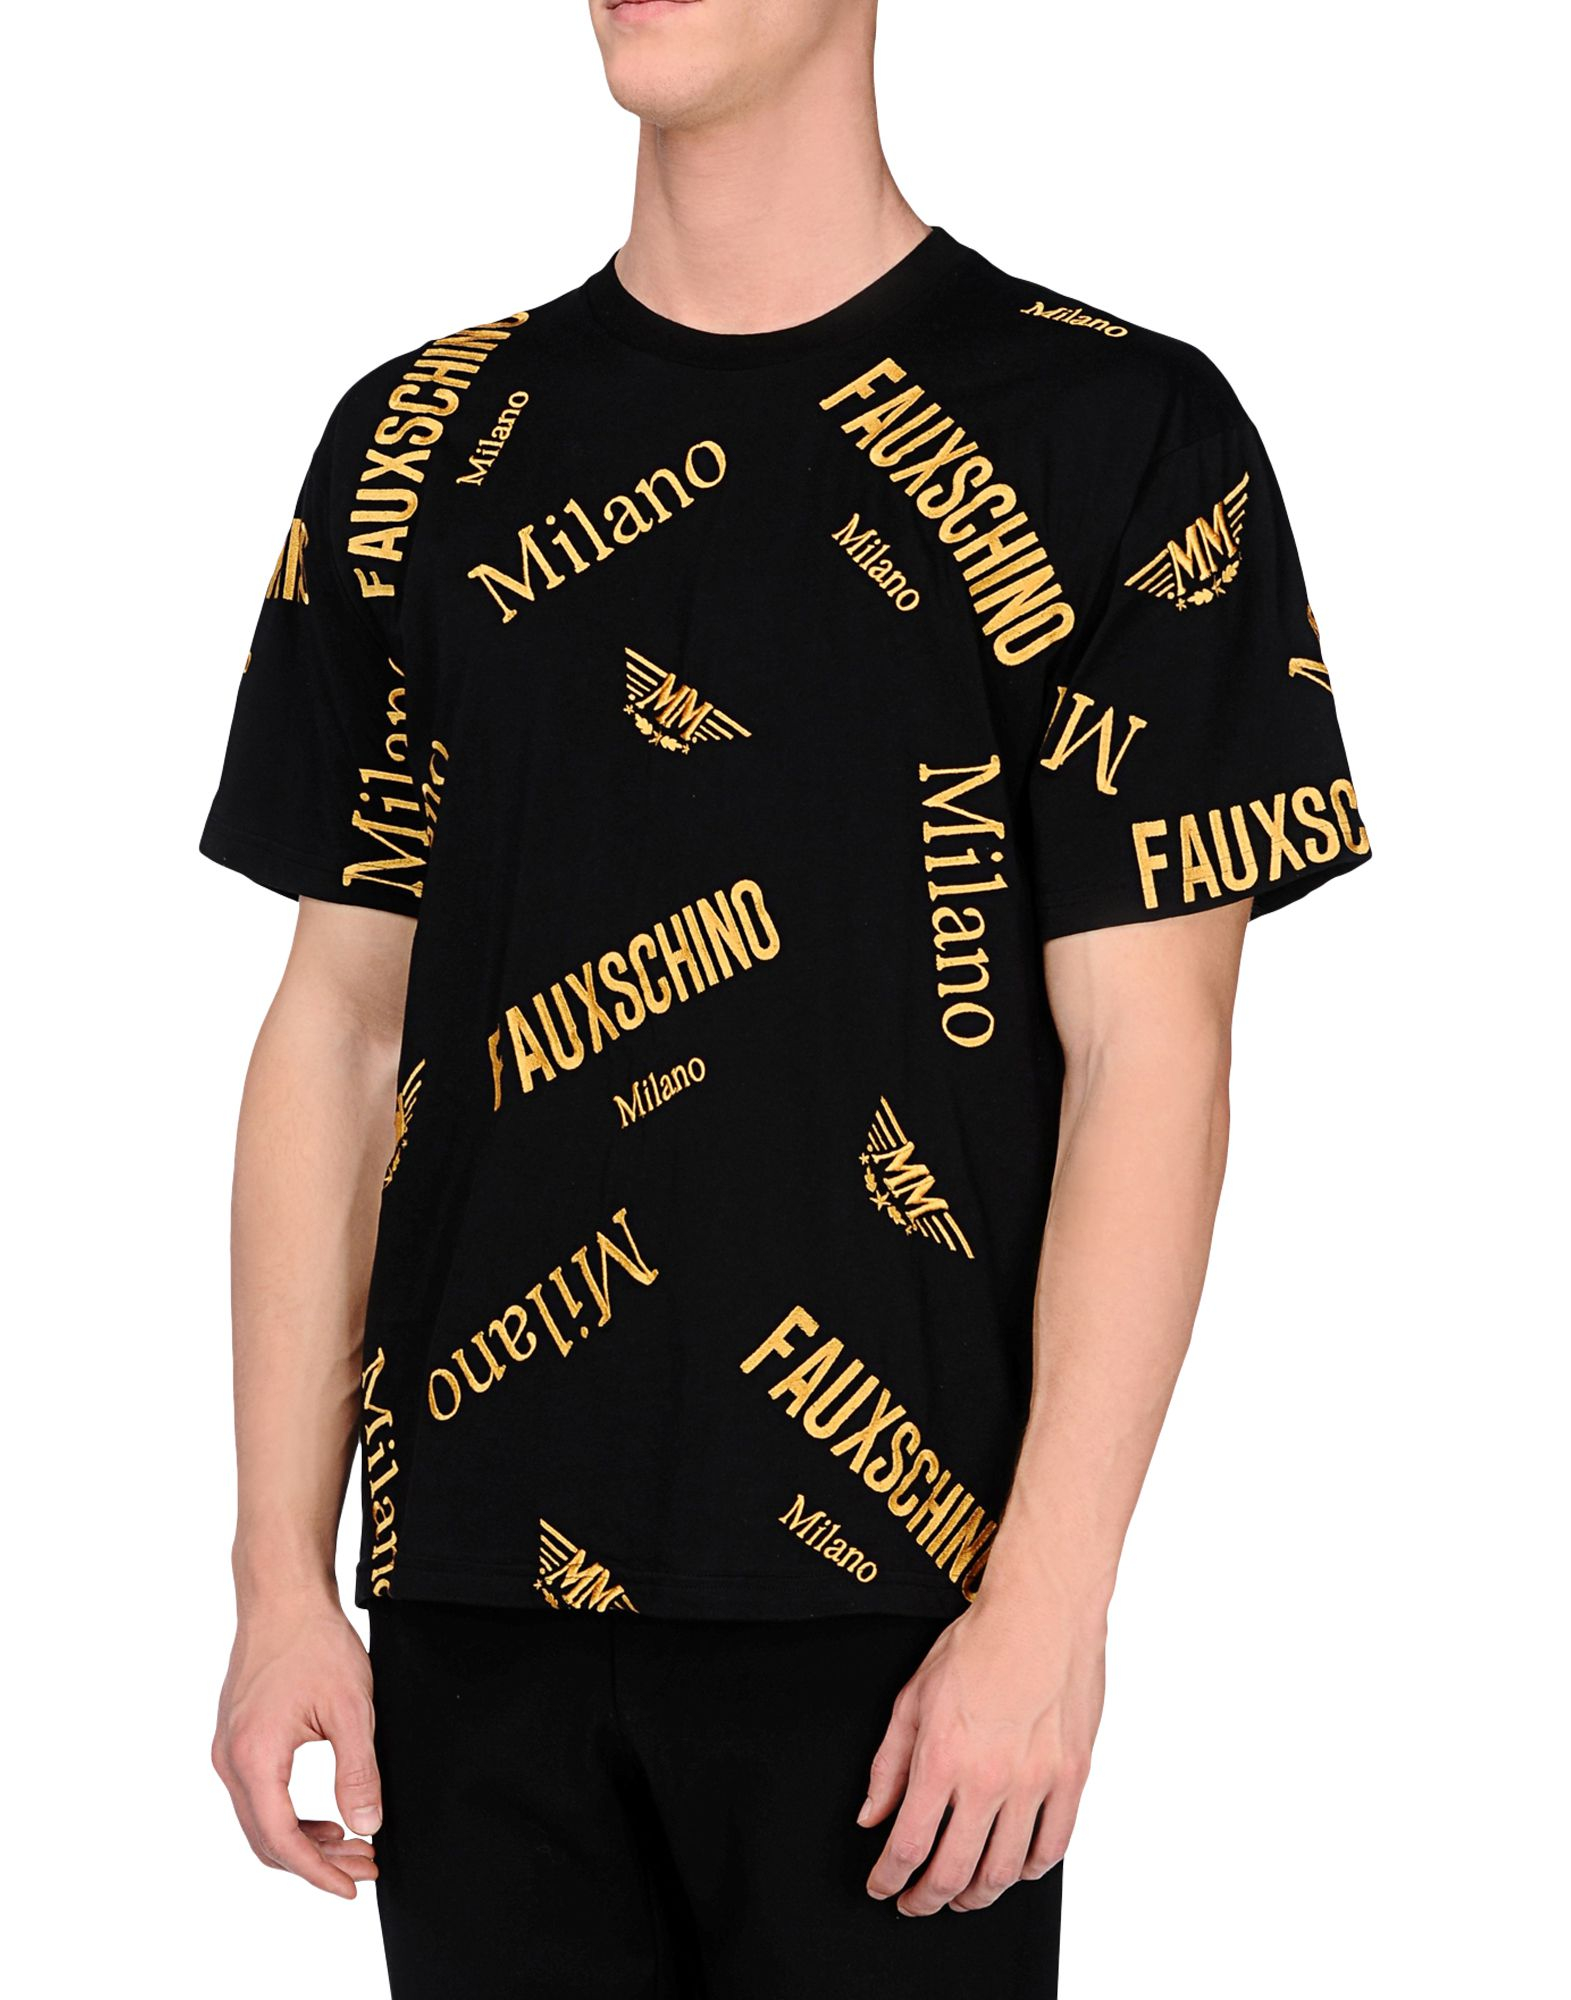 Lyst - Moschino Printed T-Shirt in Black for Men